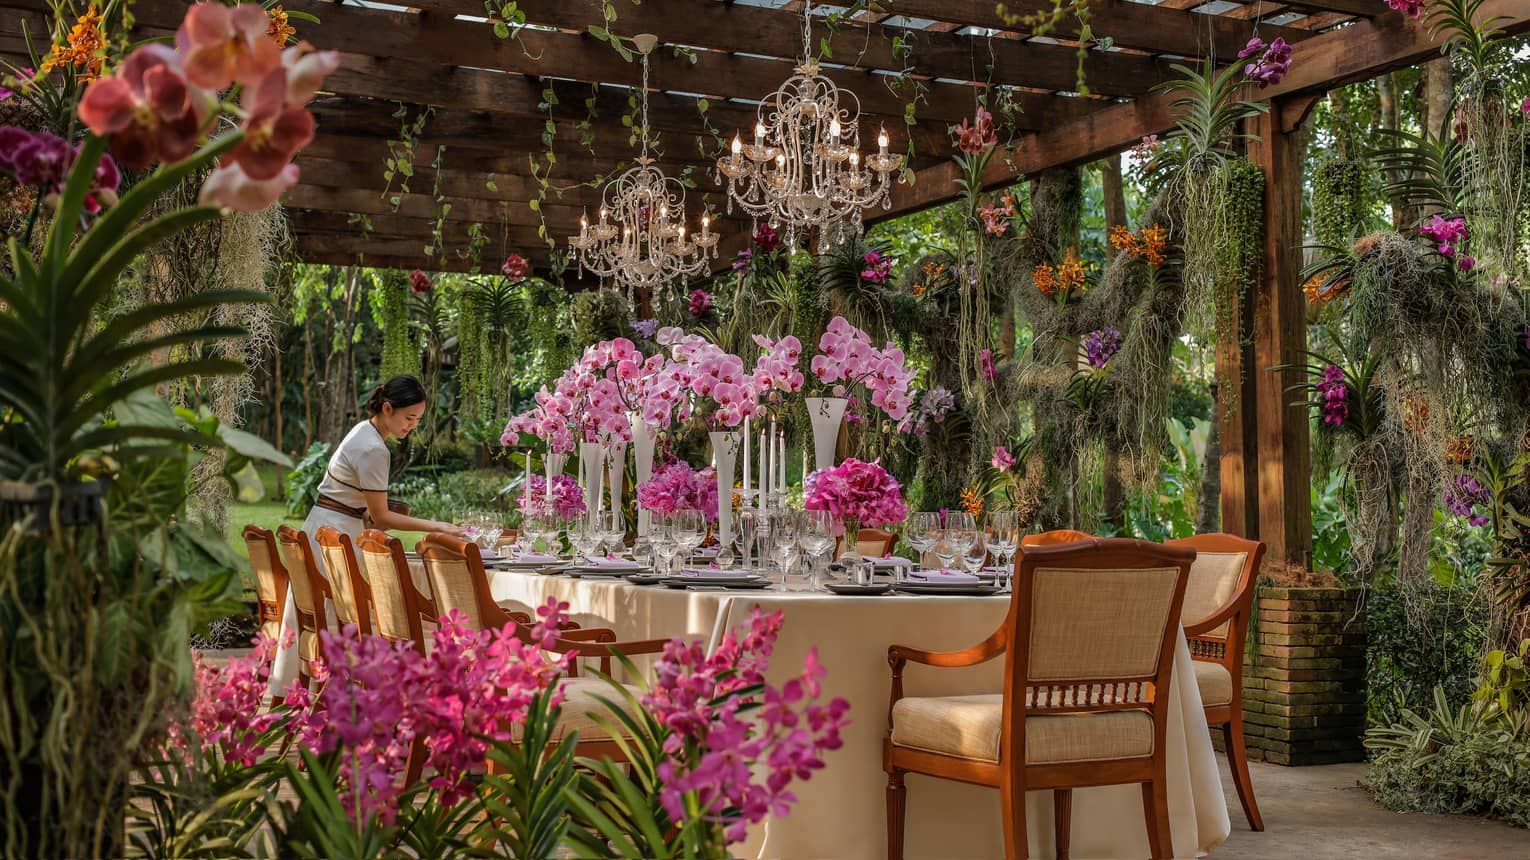 Hotel staff sets large formal dining table in tropical garden, large pink flowers under small crystal chandeliers